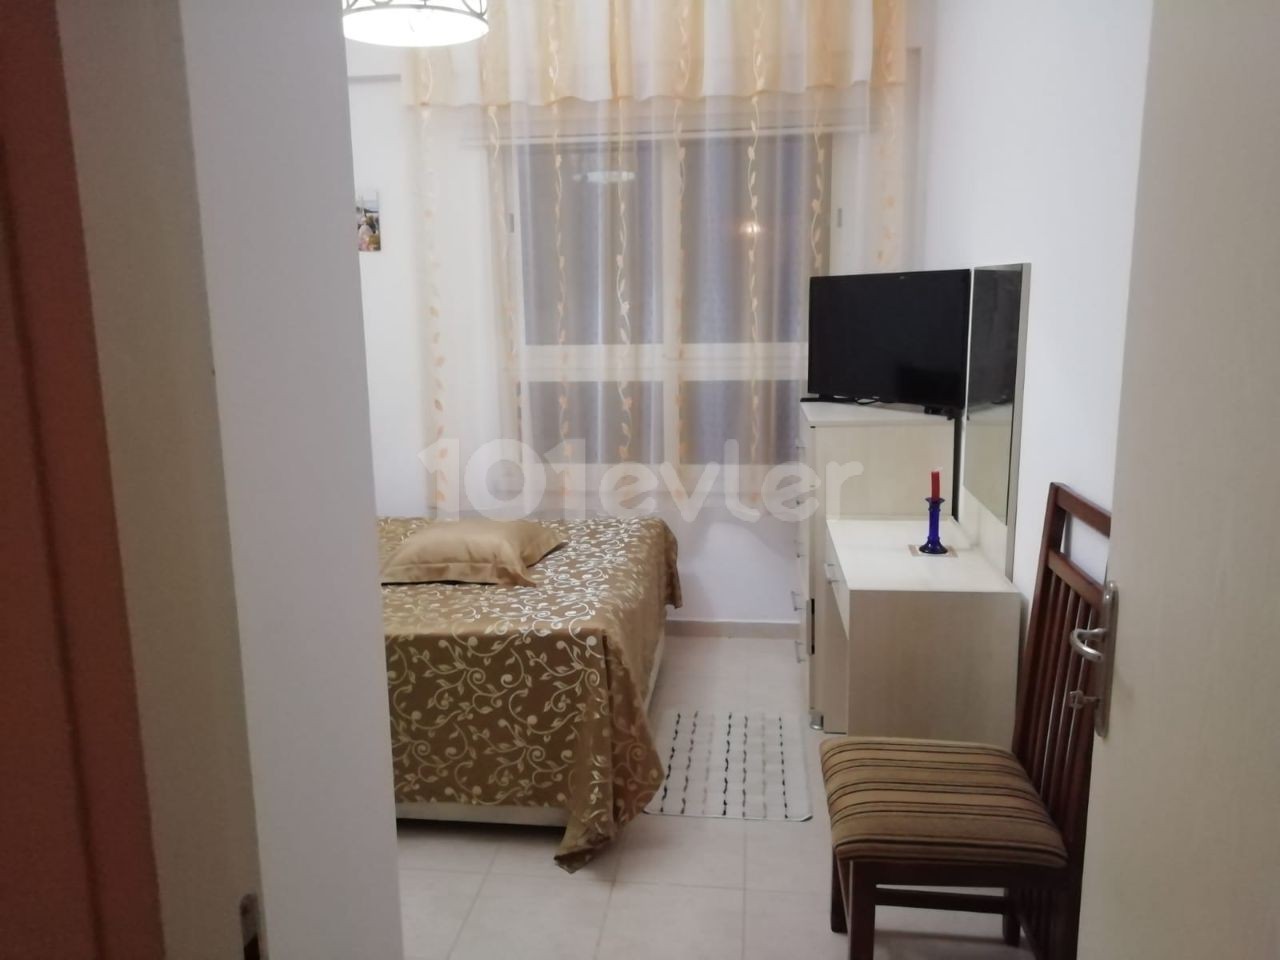 Kyrenia - Esentepe, furnished, 2+1 flat with white goods and private garden. It is 300 meters from the sea. We can speak Turkish, English and Russian.